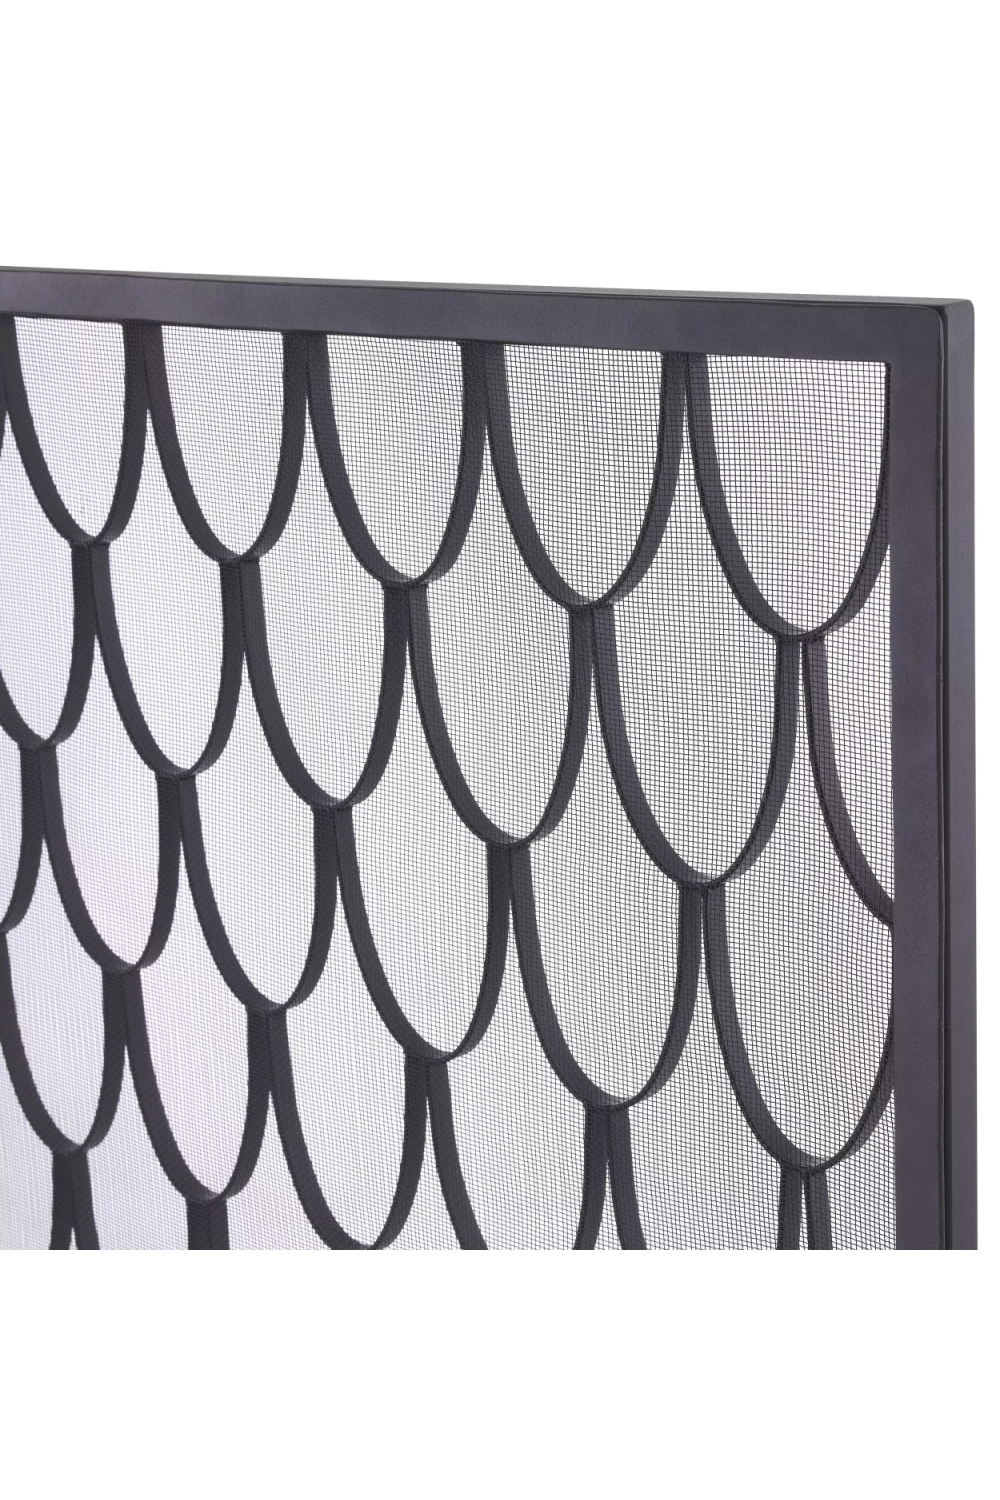 Scale Patterned Fire Screen | Eichholtz Valois | OROA.com